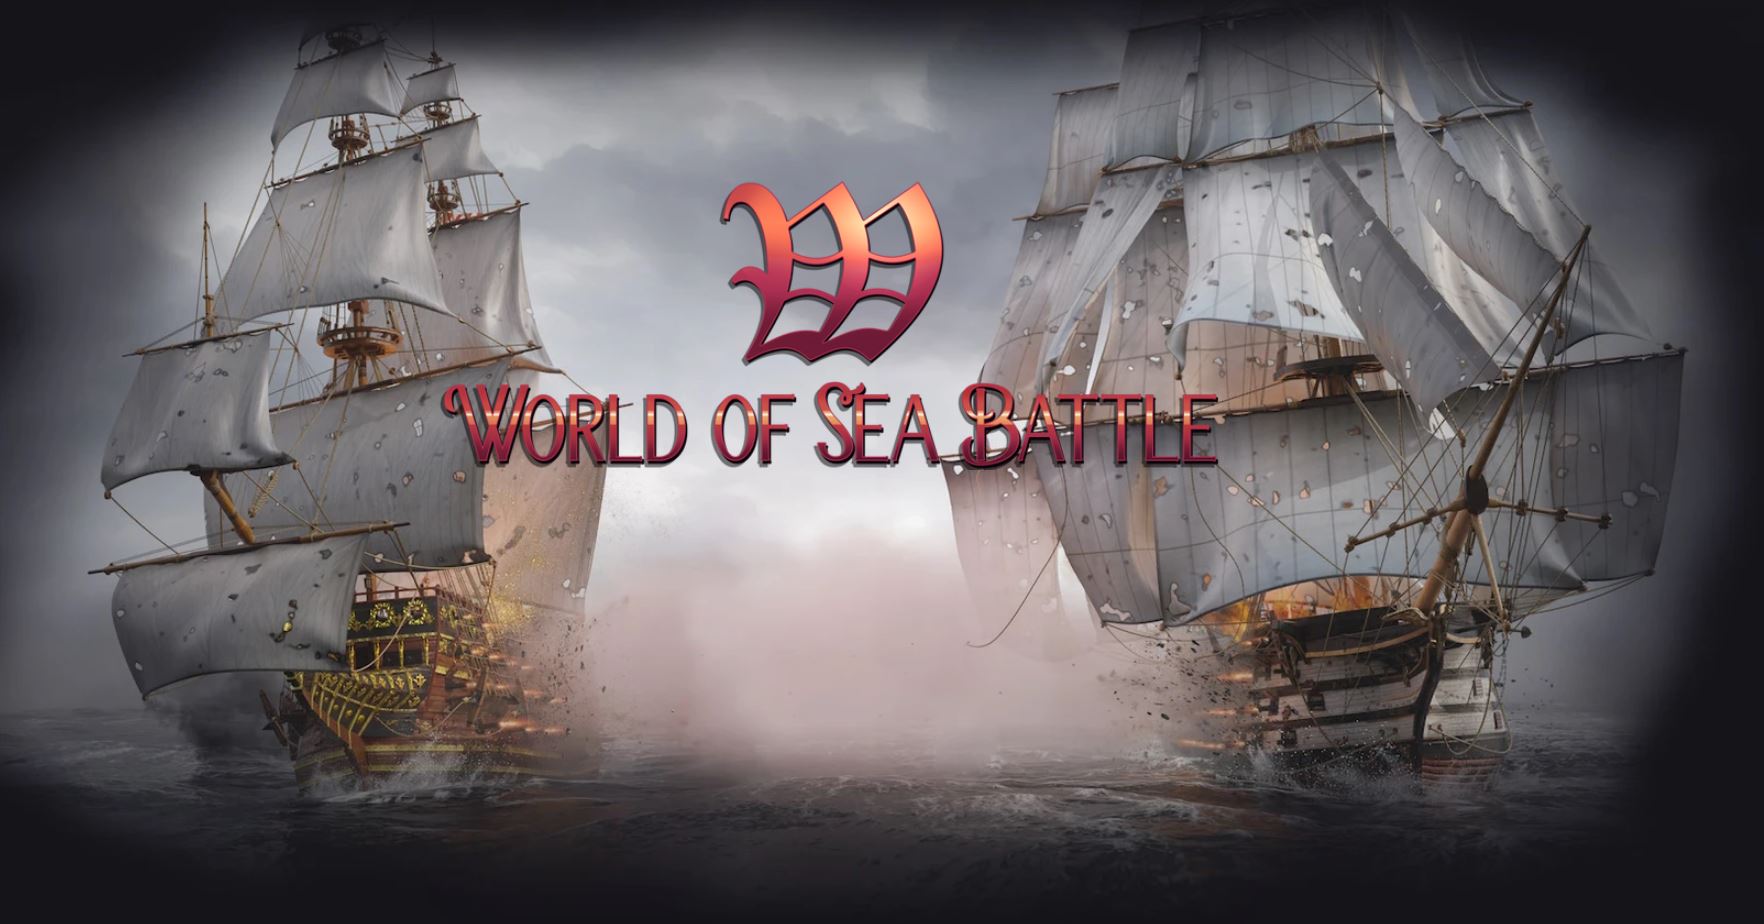 Give “World of Sea Battle” a try, it’s a Free-to-play online open-world ship game